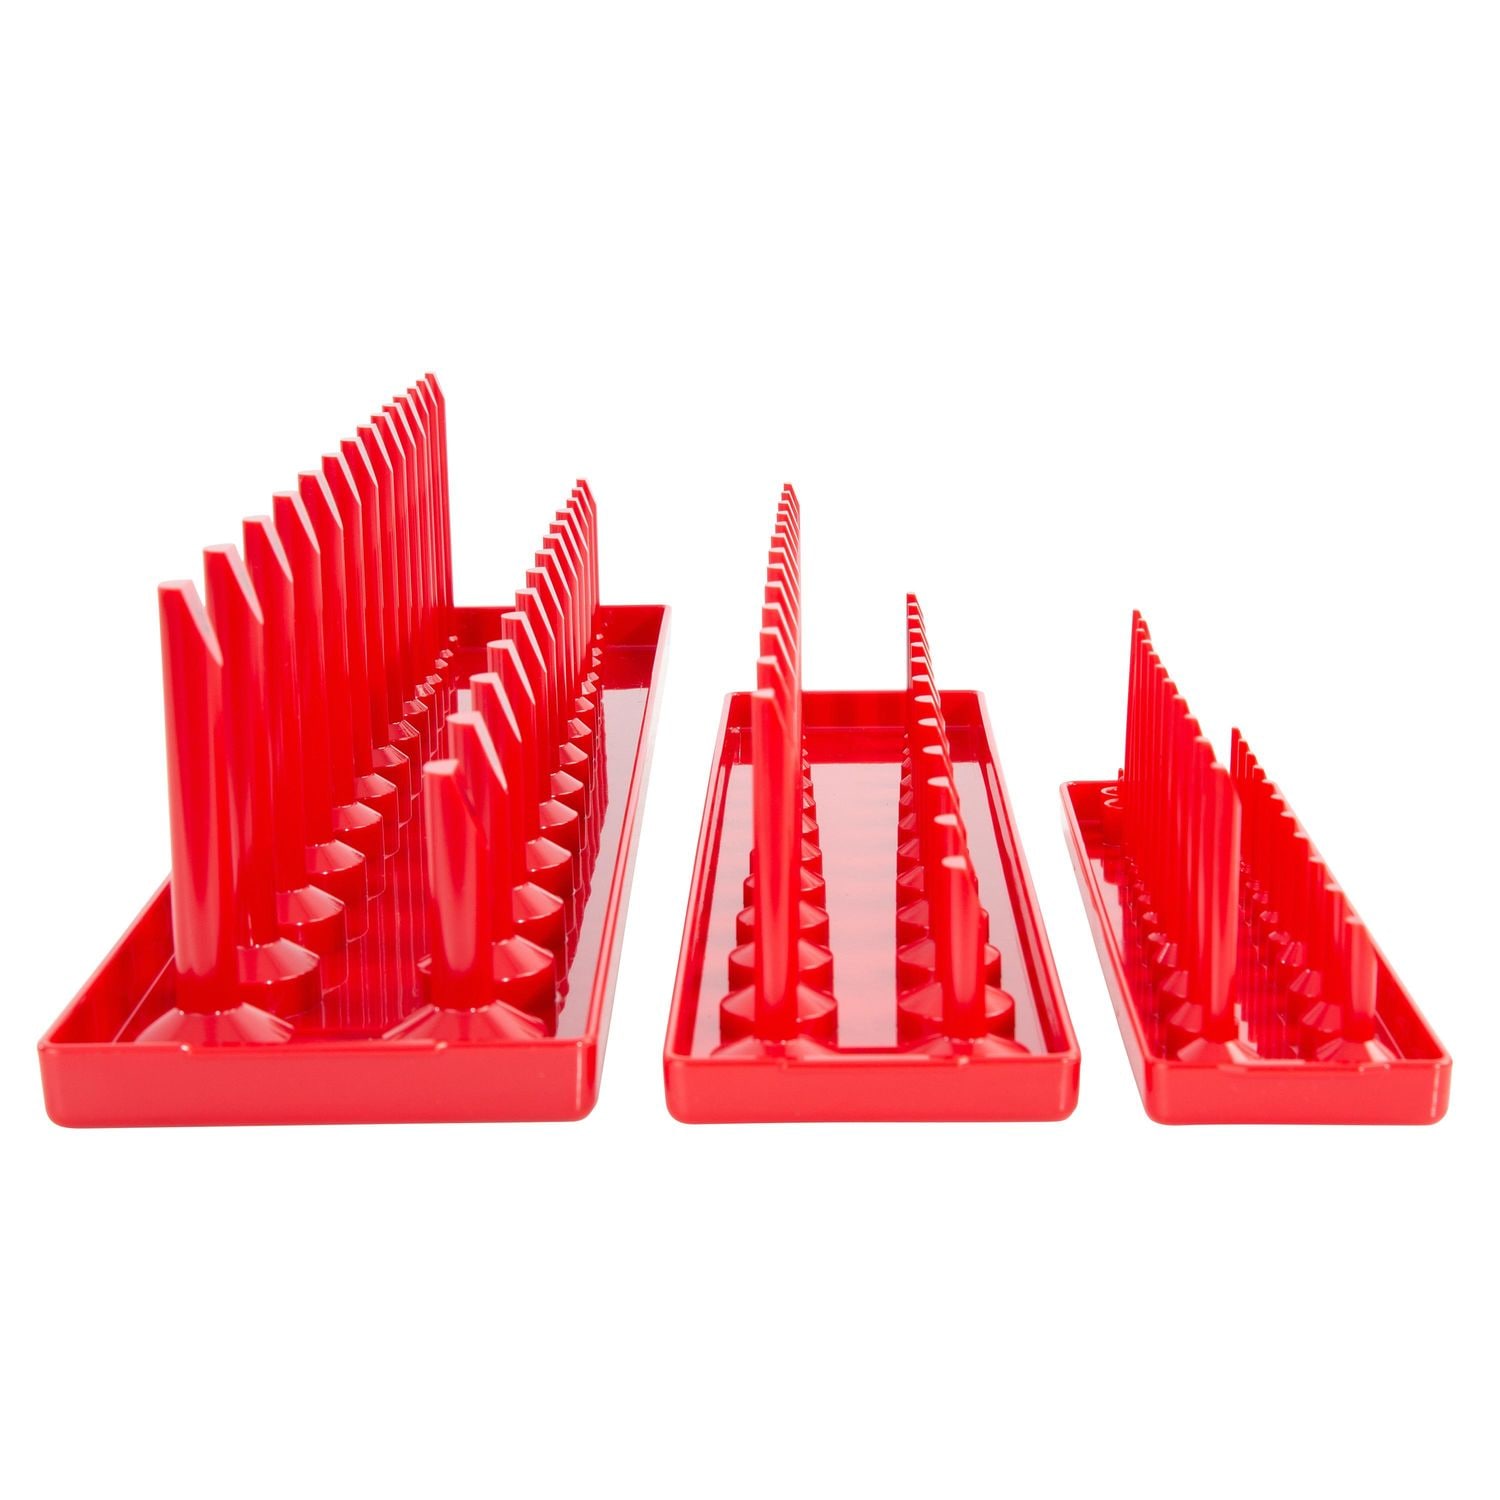 OEMTOOLS 22413 6 Piece SAE and Metric Socket Tray Set (Red and Gray)